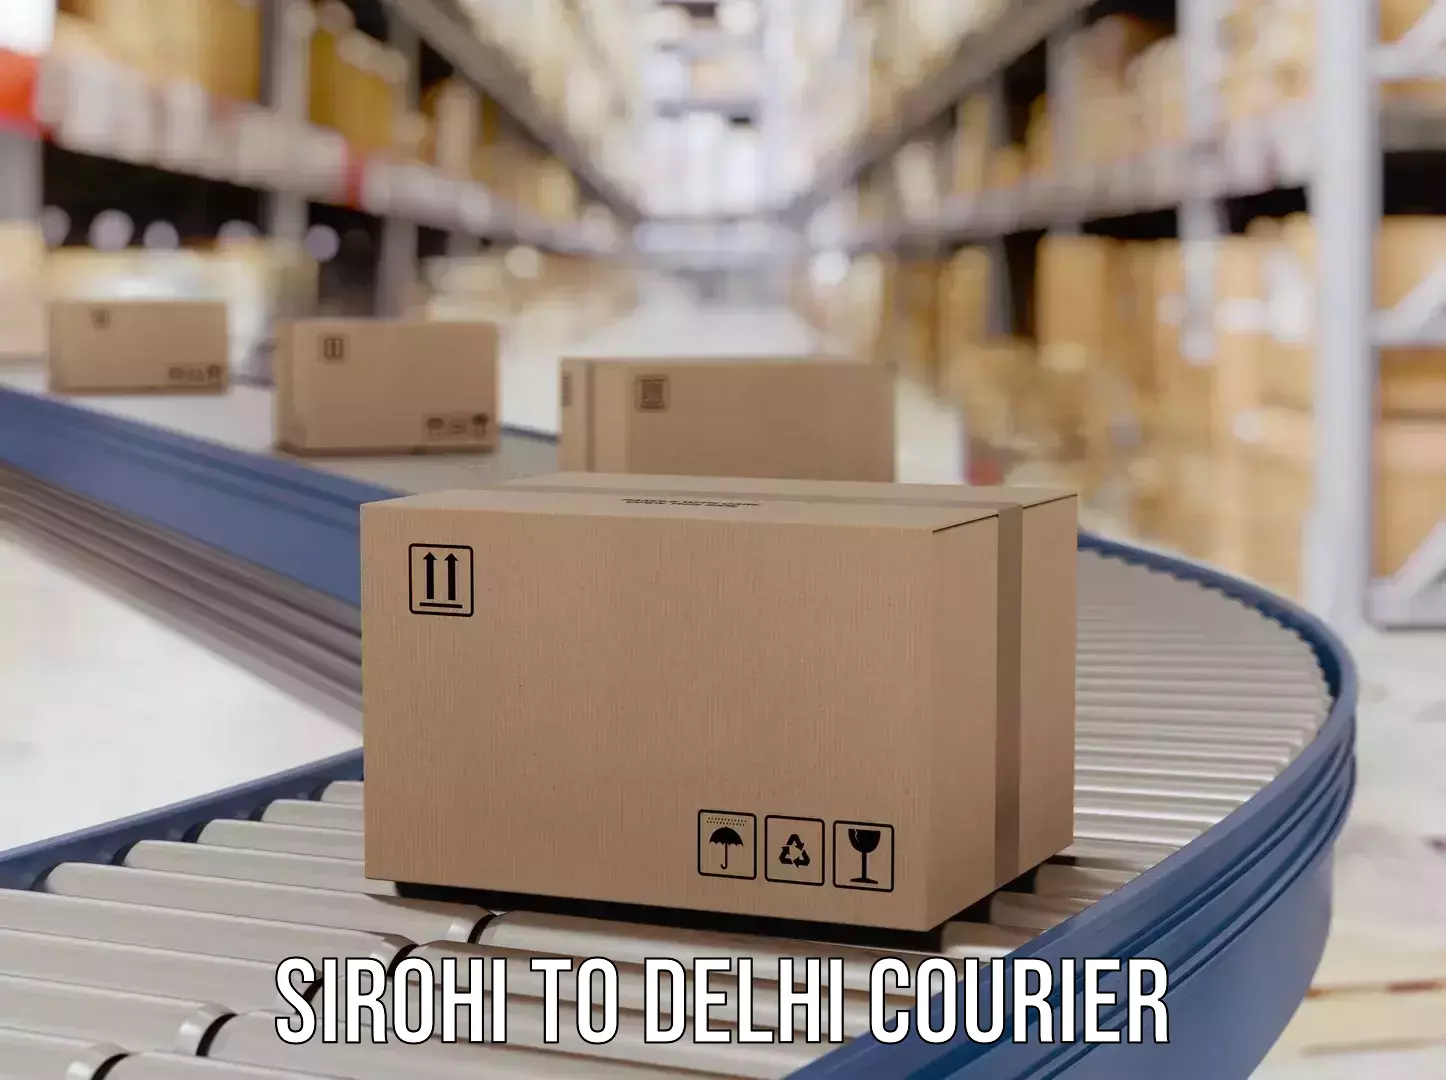 On-call courier service Sirohi to Delhi